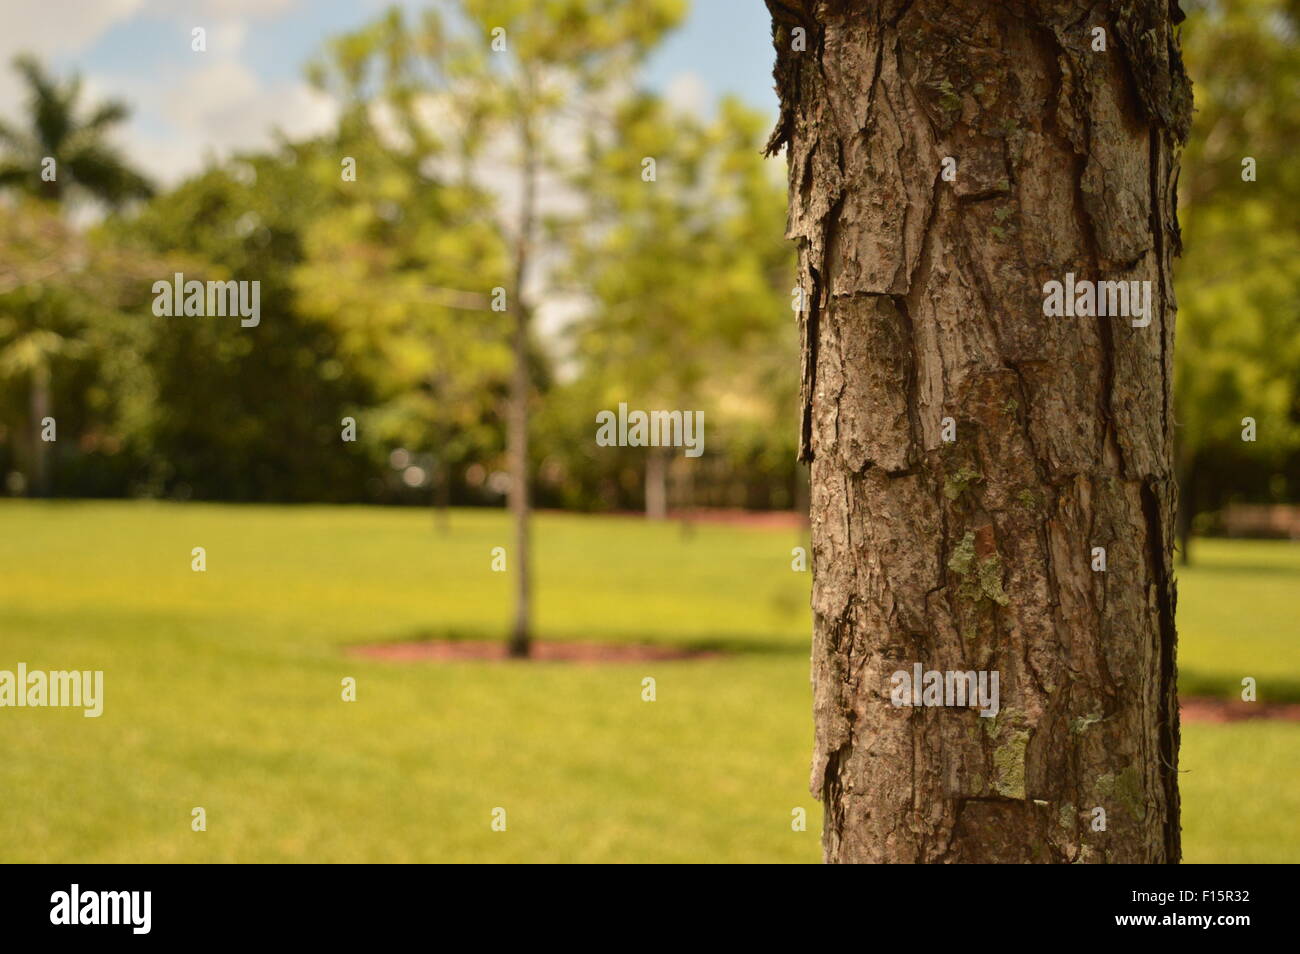 Skinny tree in the foreground with blurry trees in the background Stock Photo